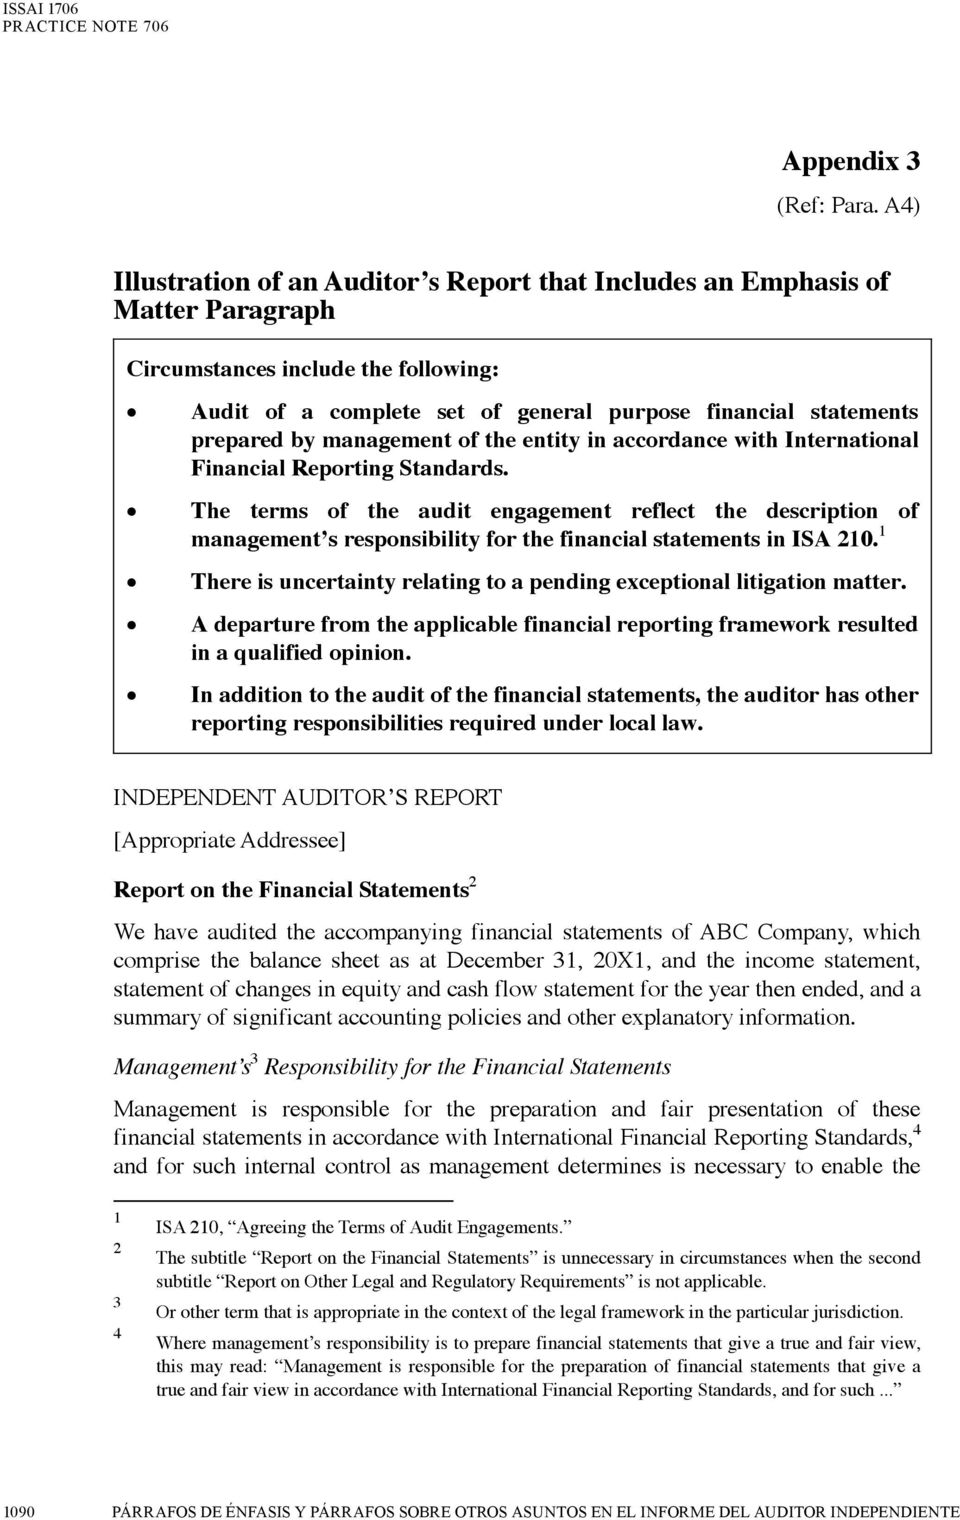 management of the entity in accordance with International Financial Reporting Standards.